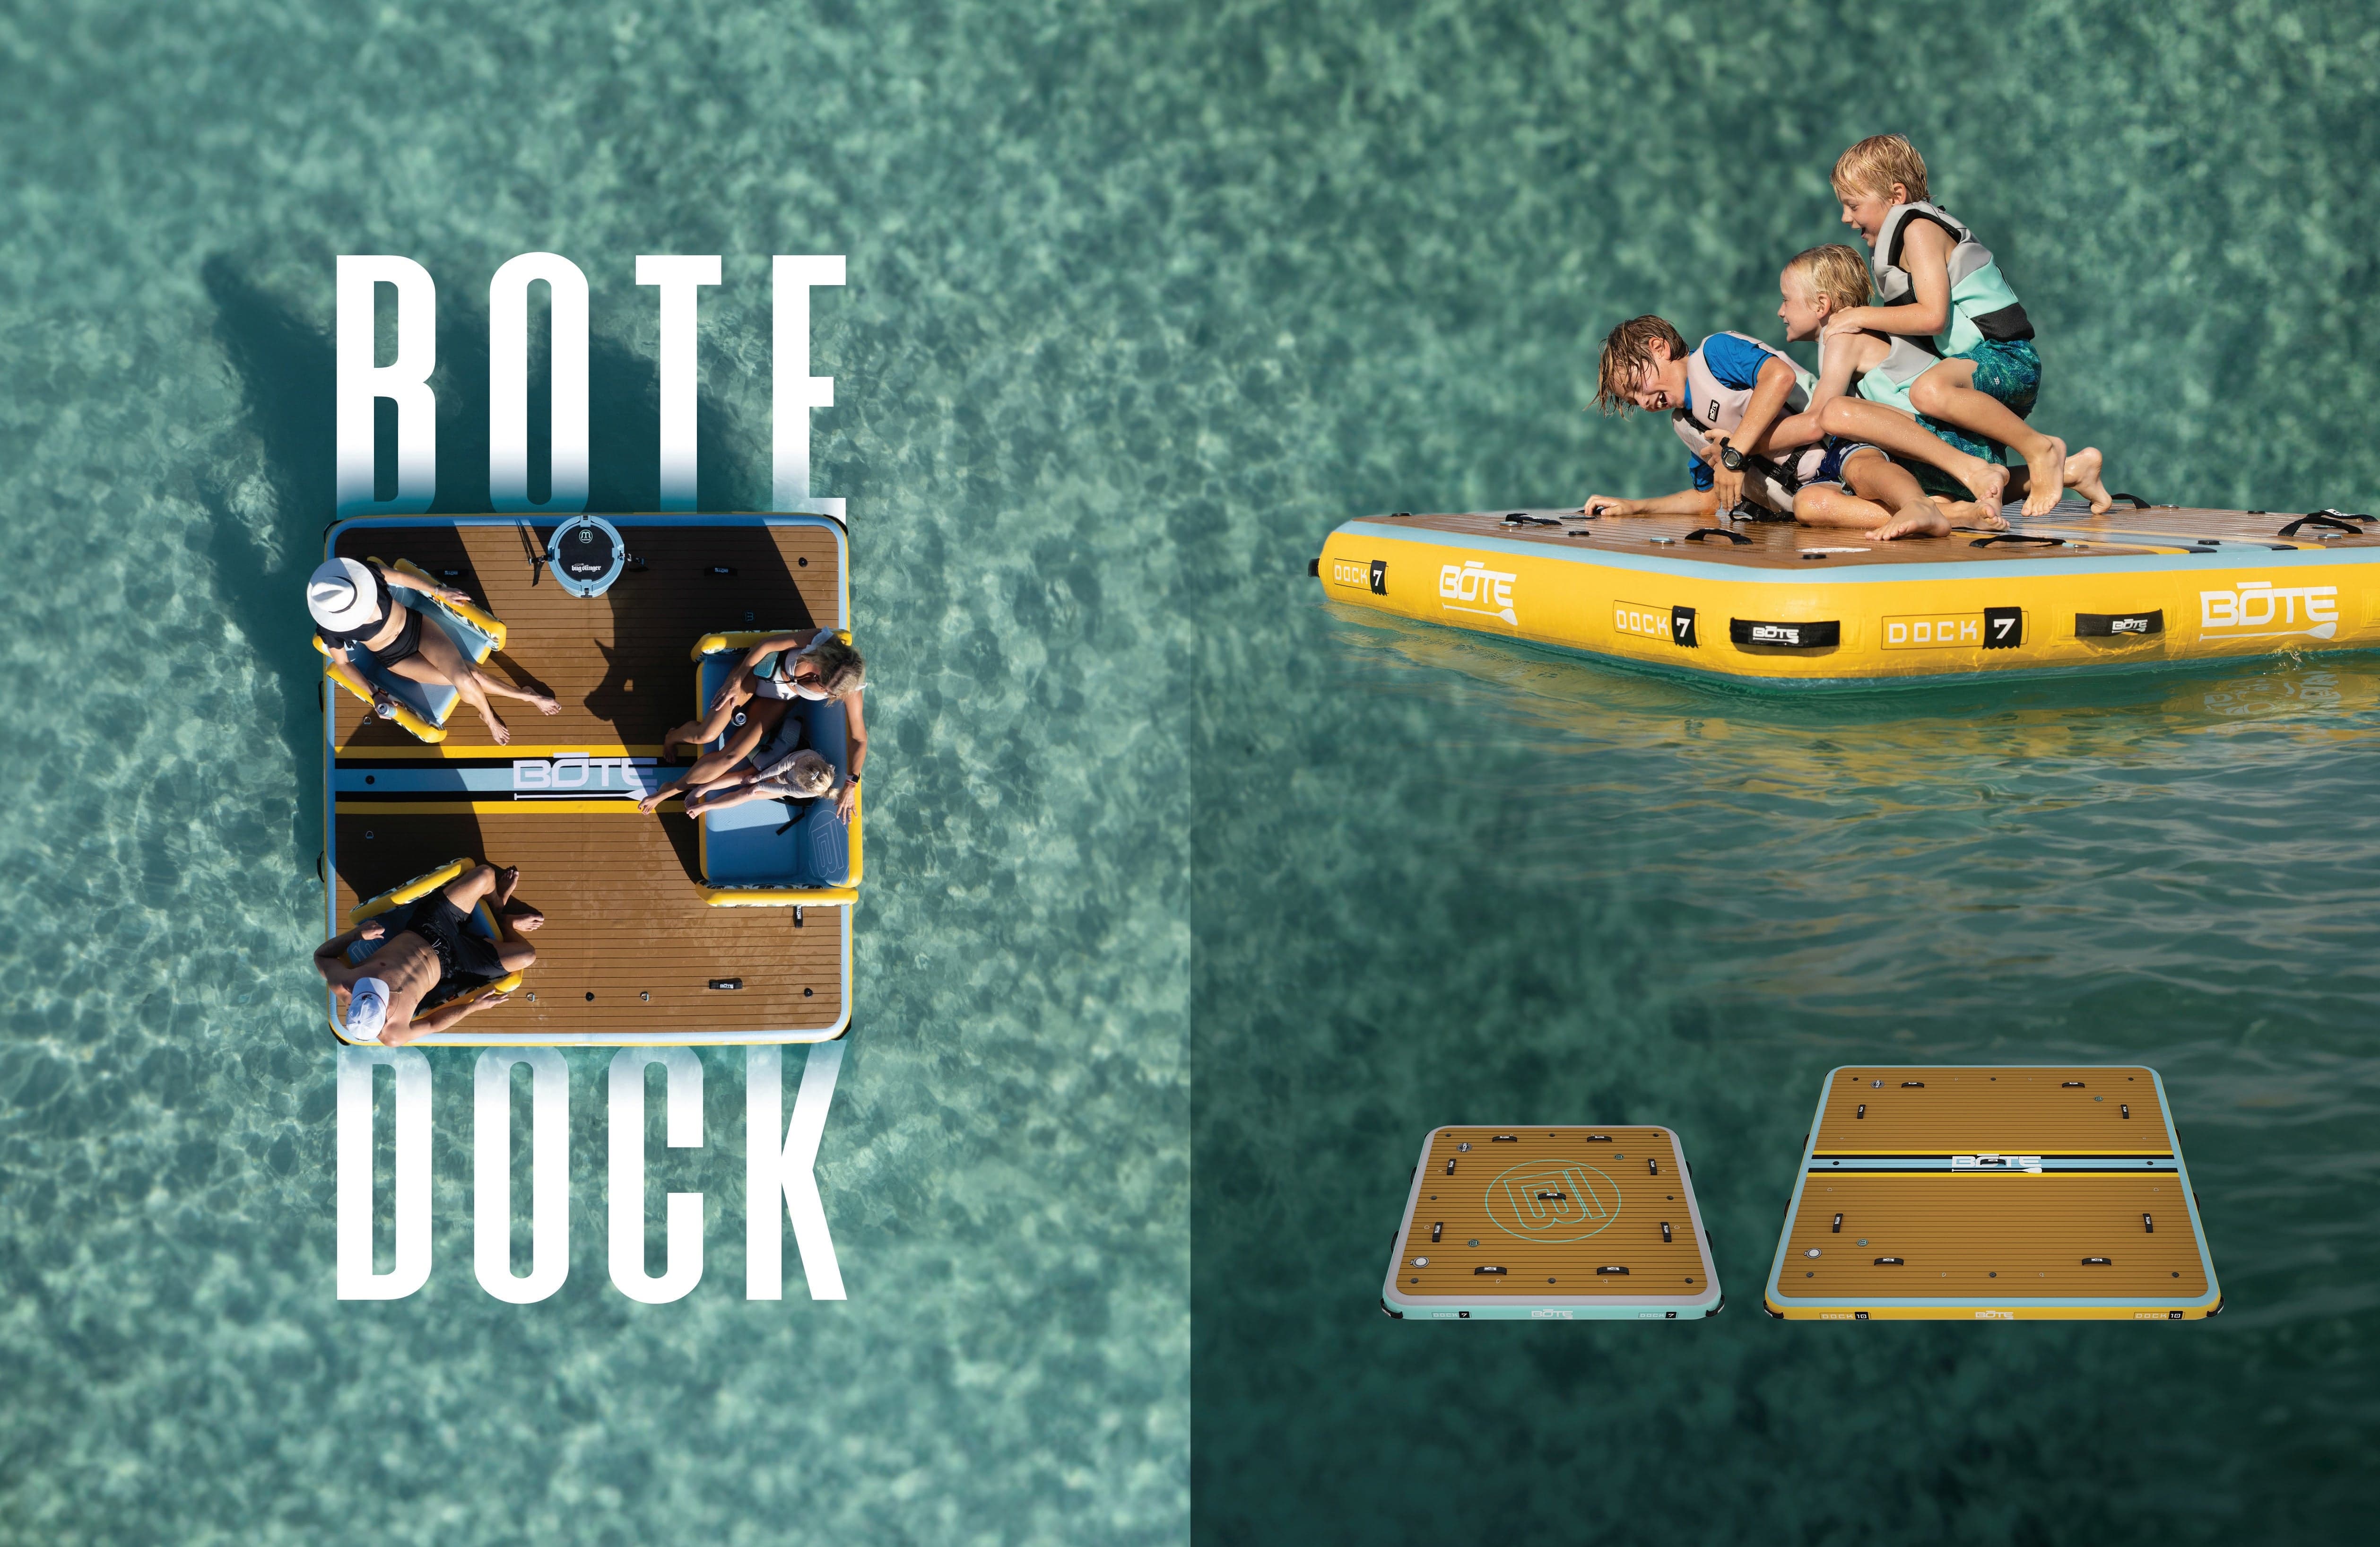 Inflatable Dock on Water - Enhance Your BOTE Experience